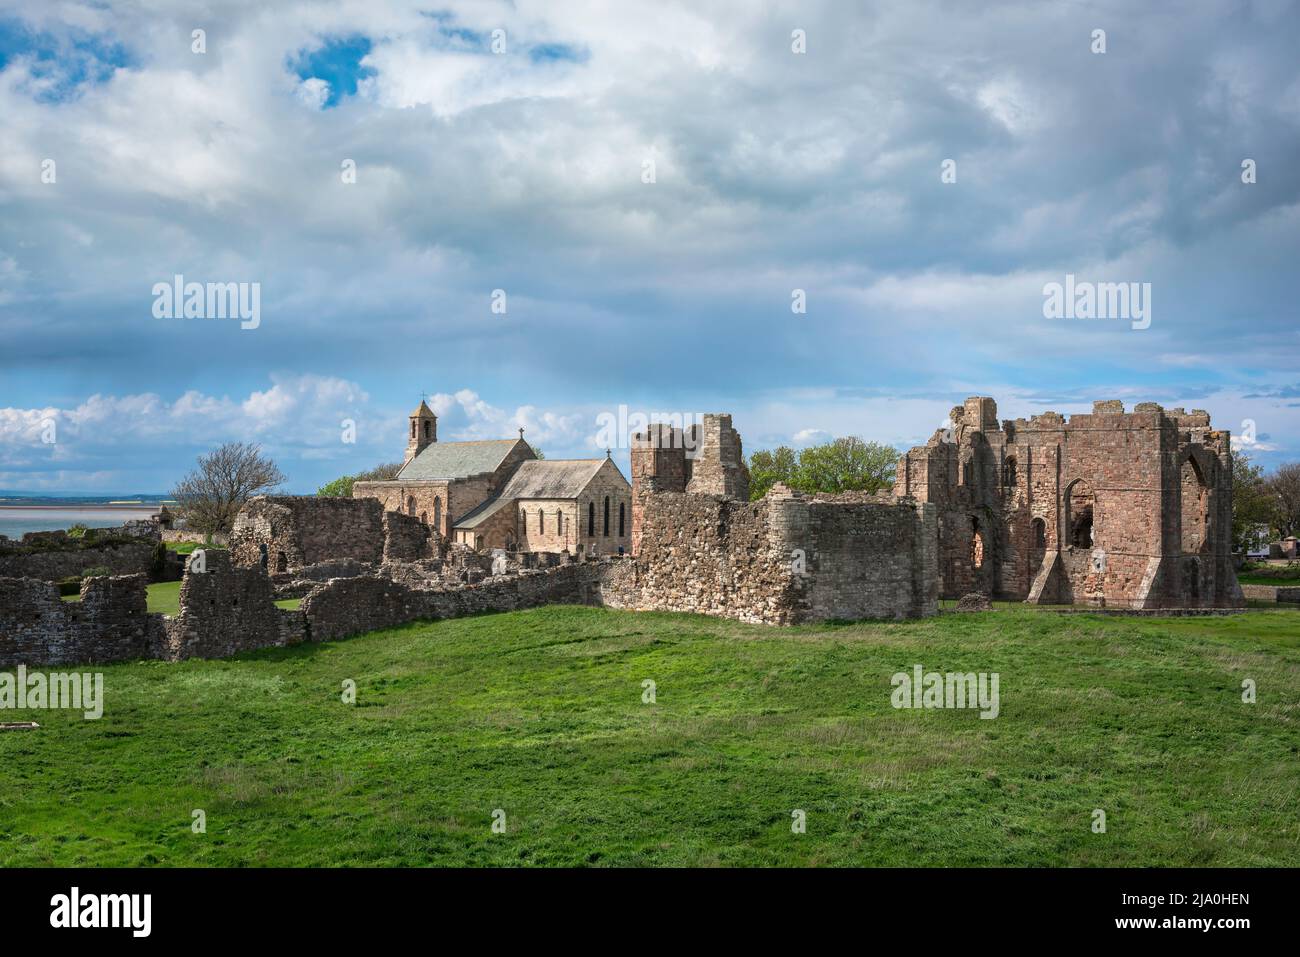 Ruins UK, view of the ruins of Lindisfarne Priory dating from the early 12th Century, Holy Island, Northumberland coast, England, UK Stock Photo